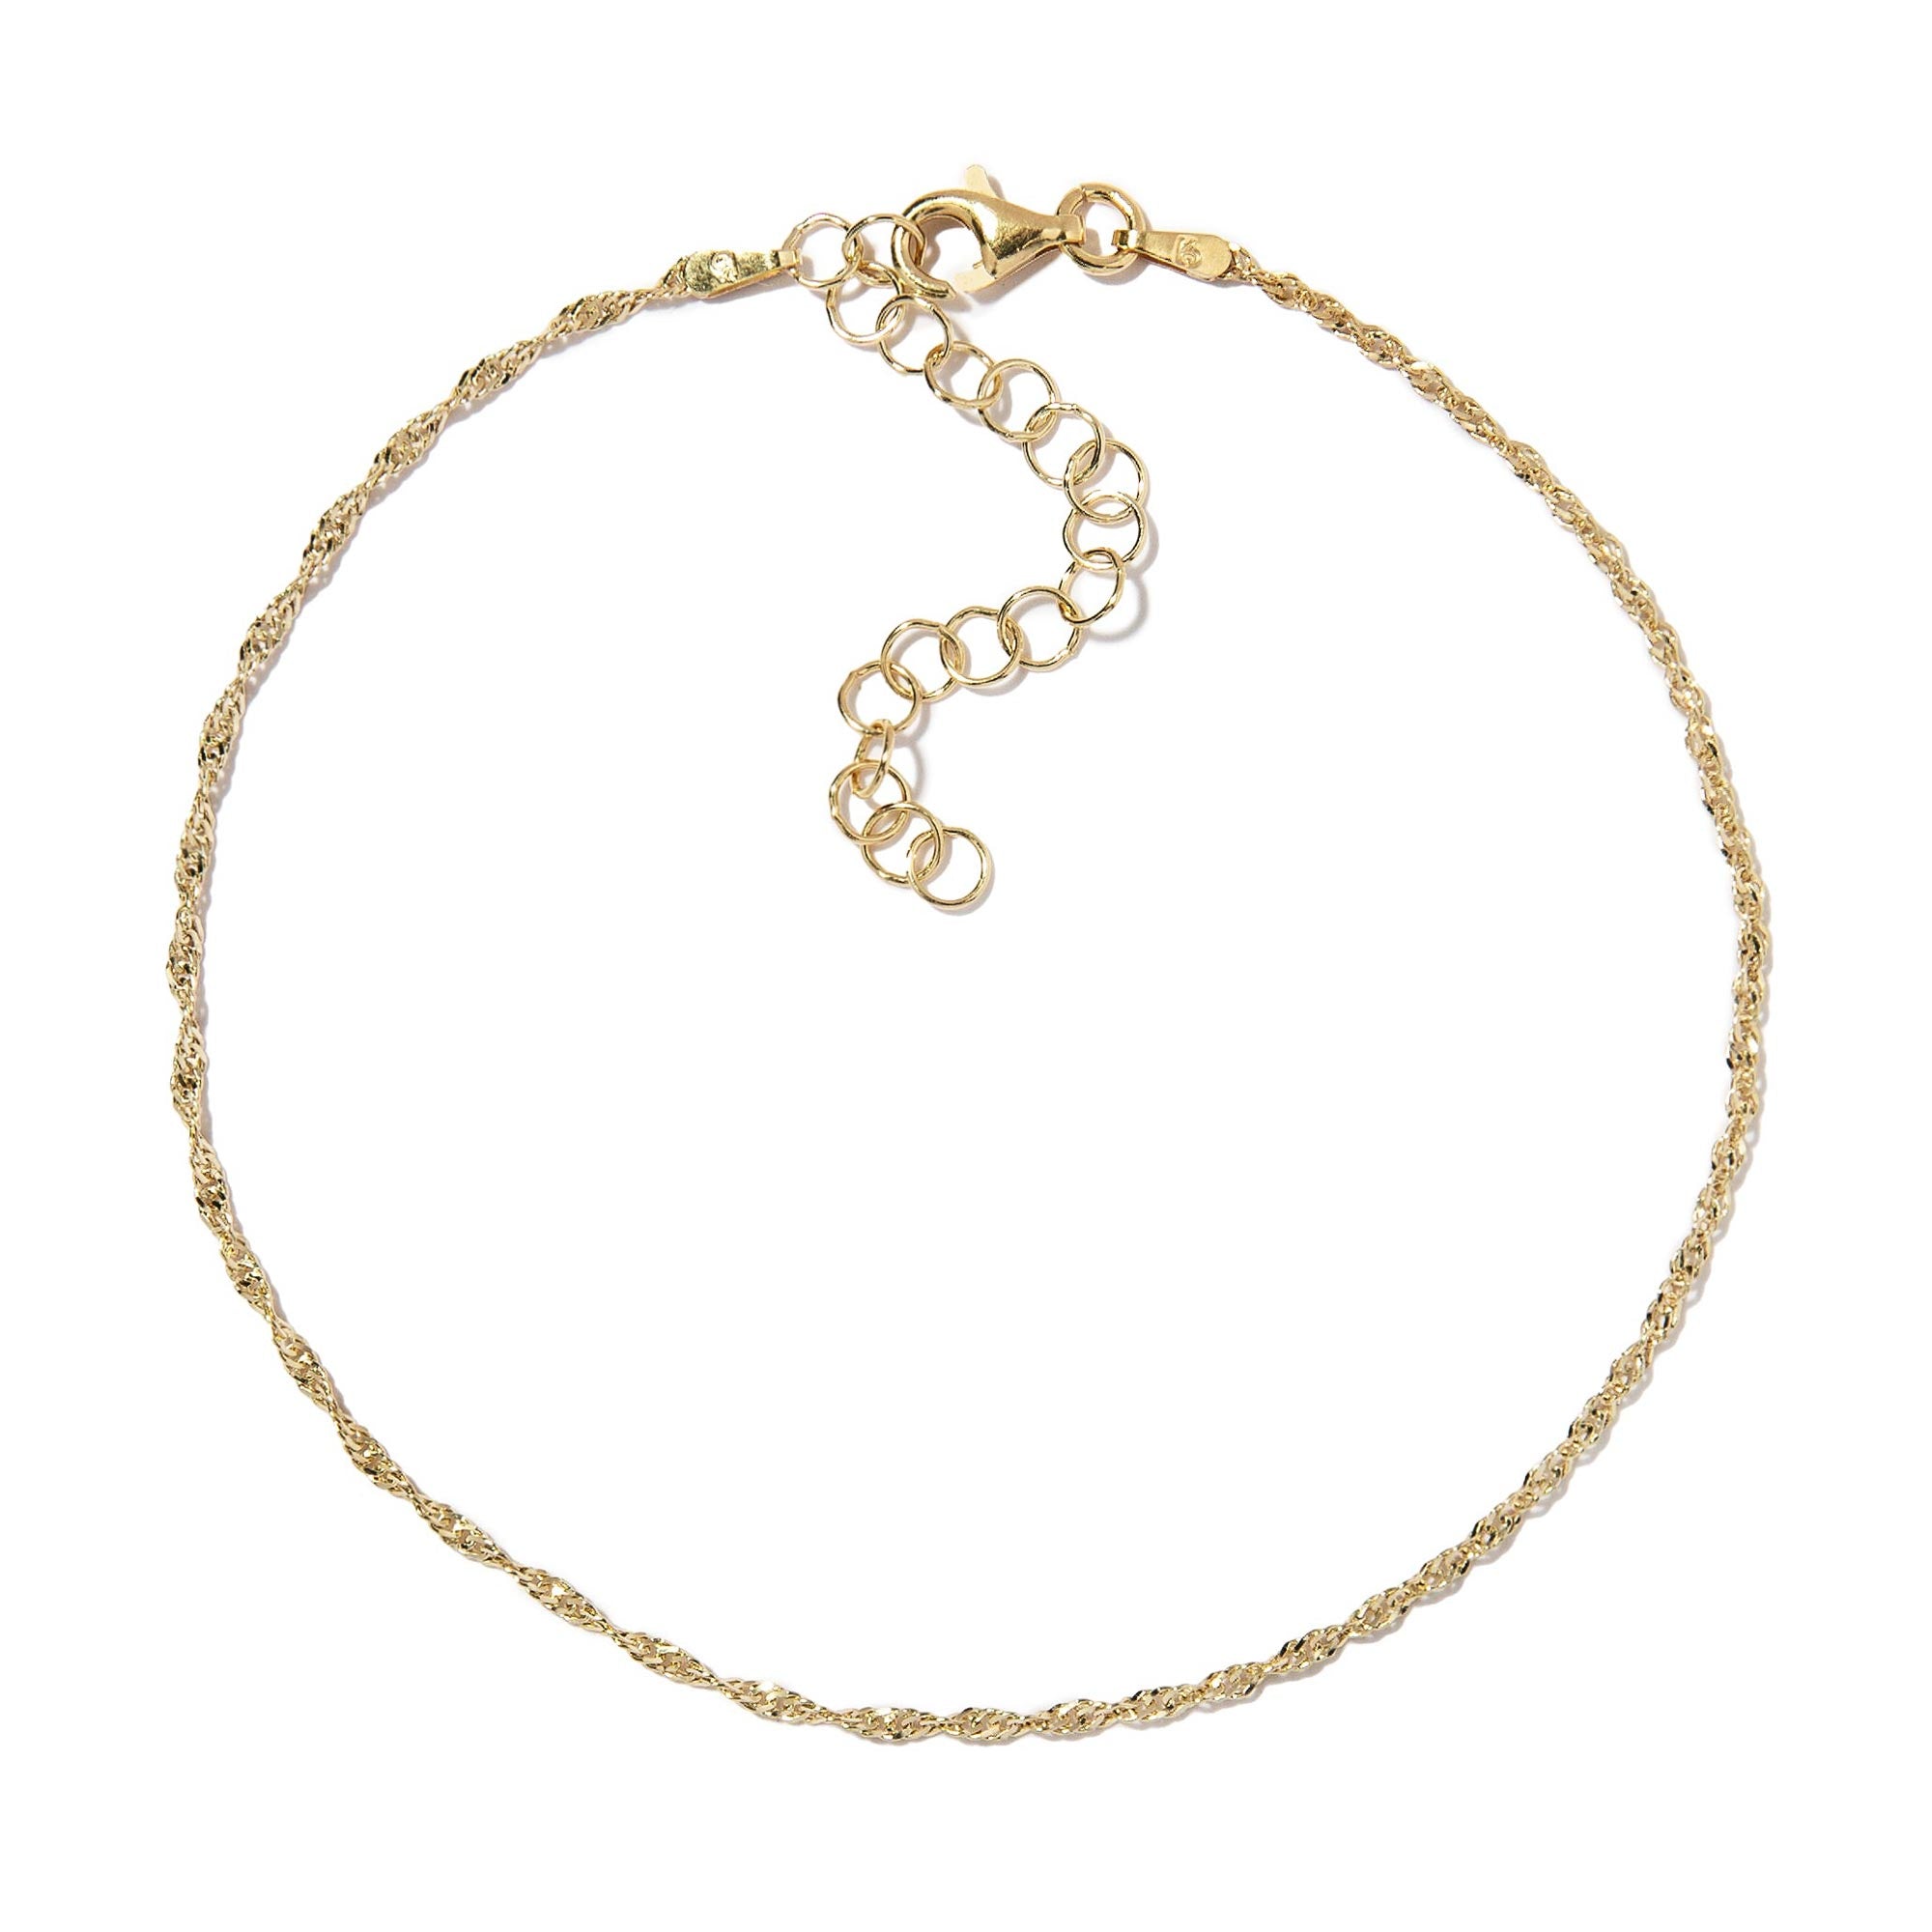 Dainty Singapore Chain Anklet